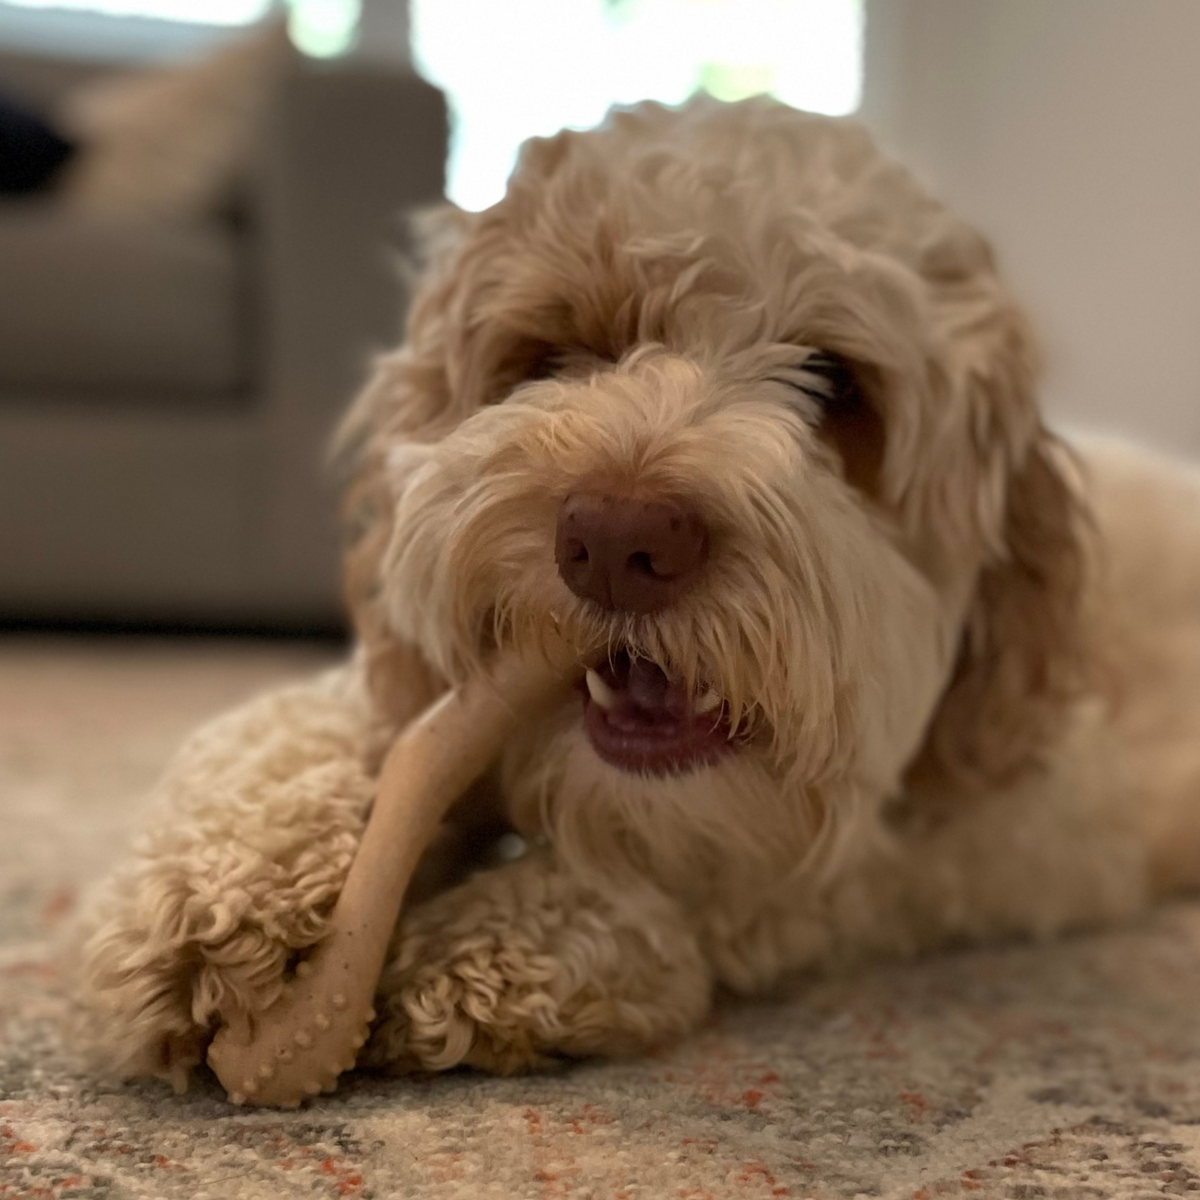 BetterBone HARD- Tough, SUPER Durable All-Natural, Dog Chews - For Aggressive Chewers.